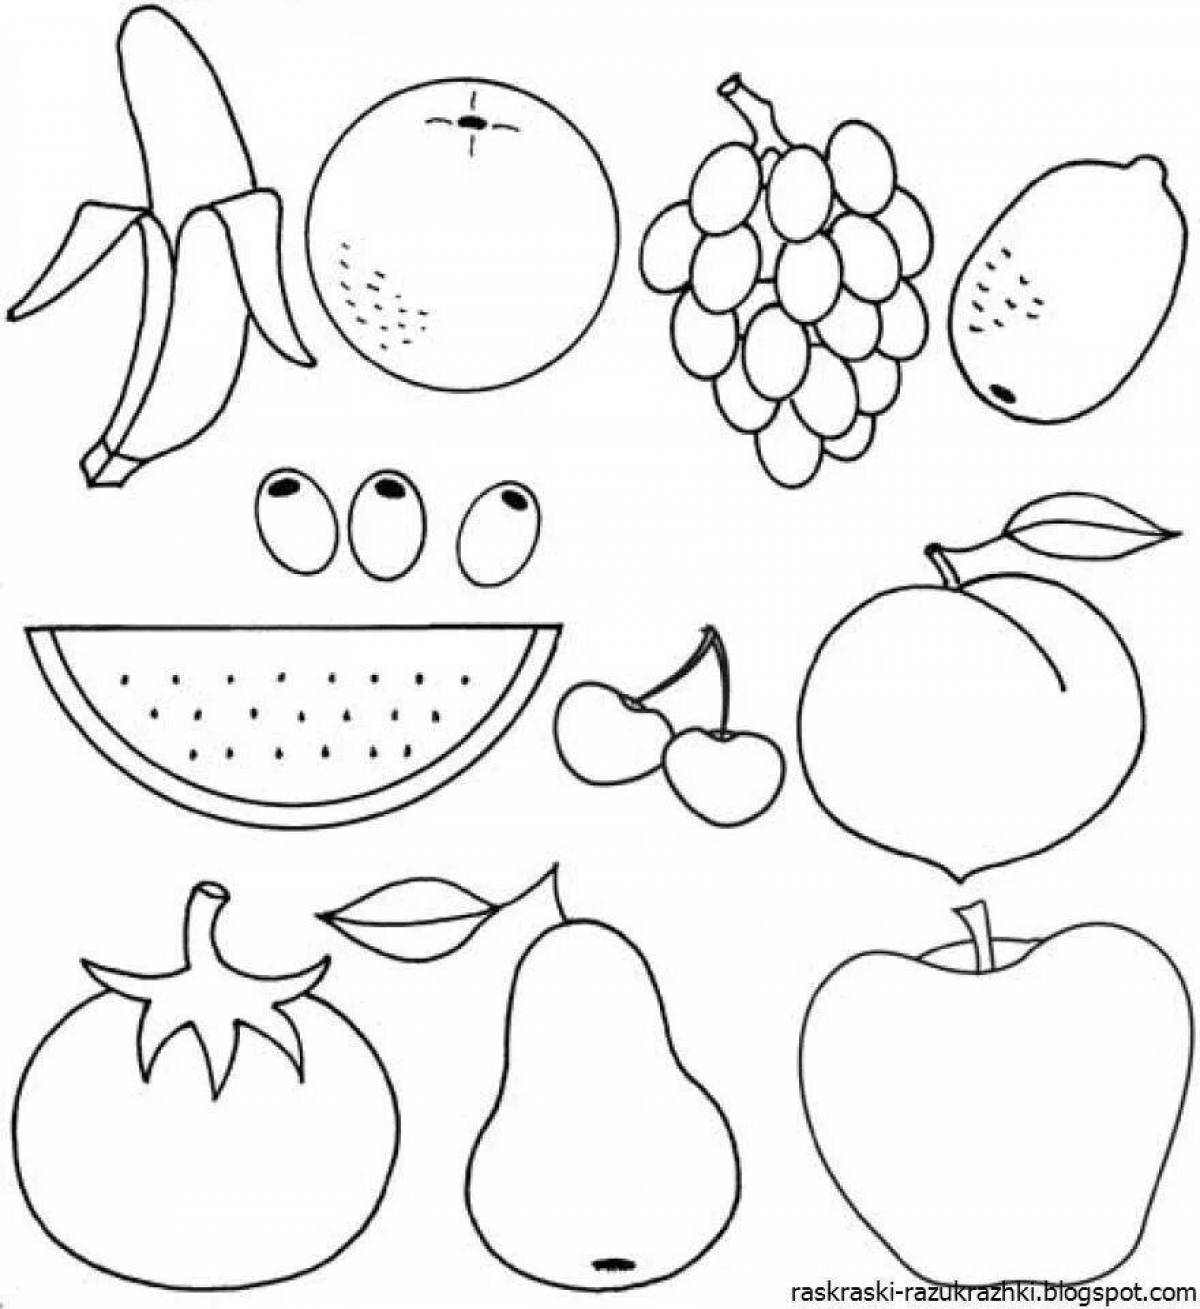 Creative vegetable coloring book for kids